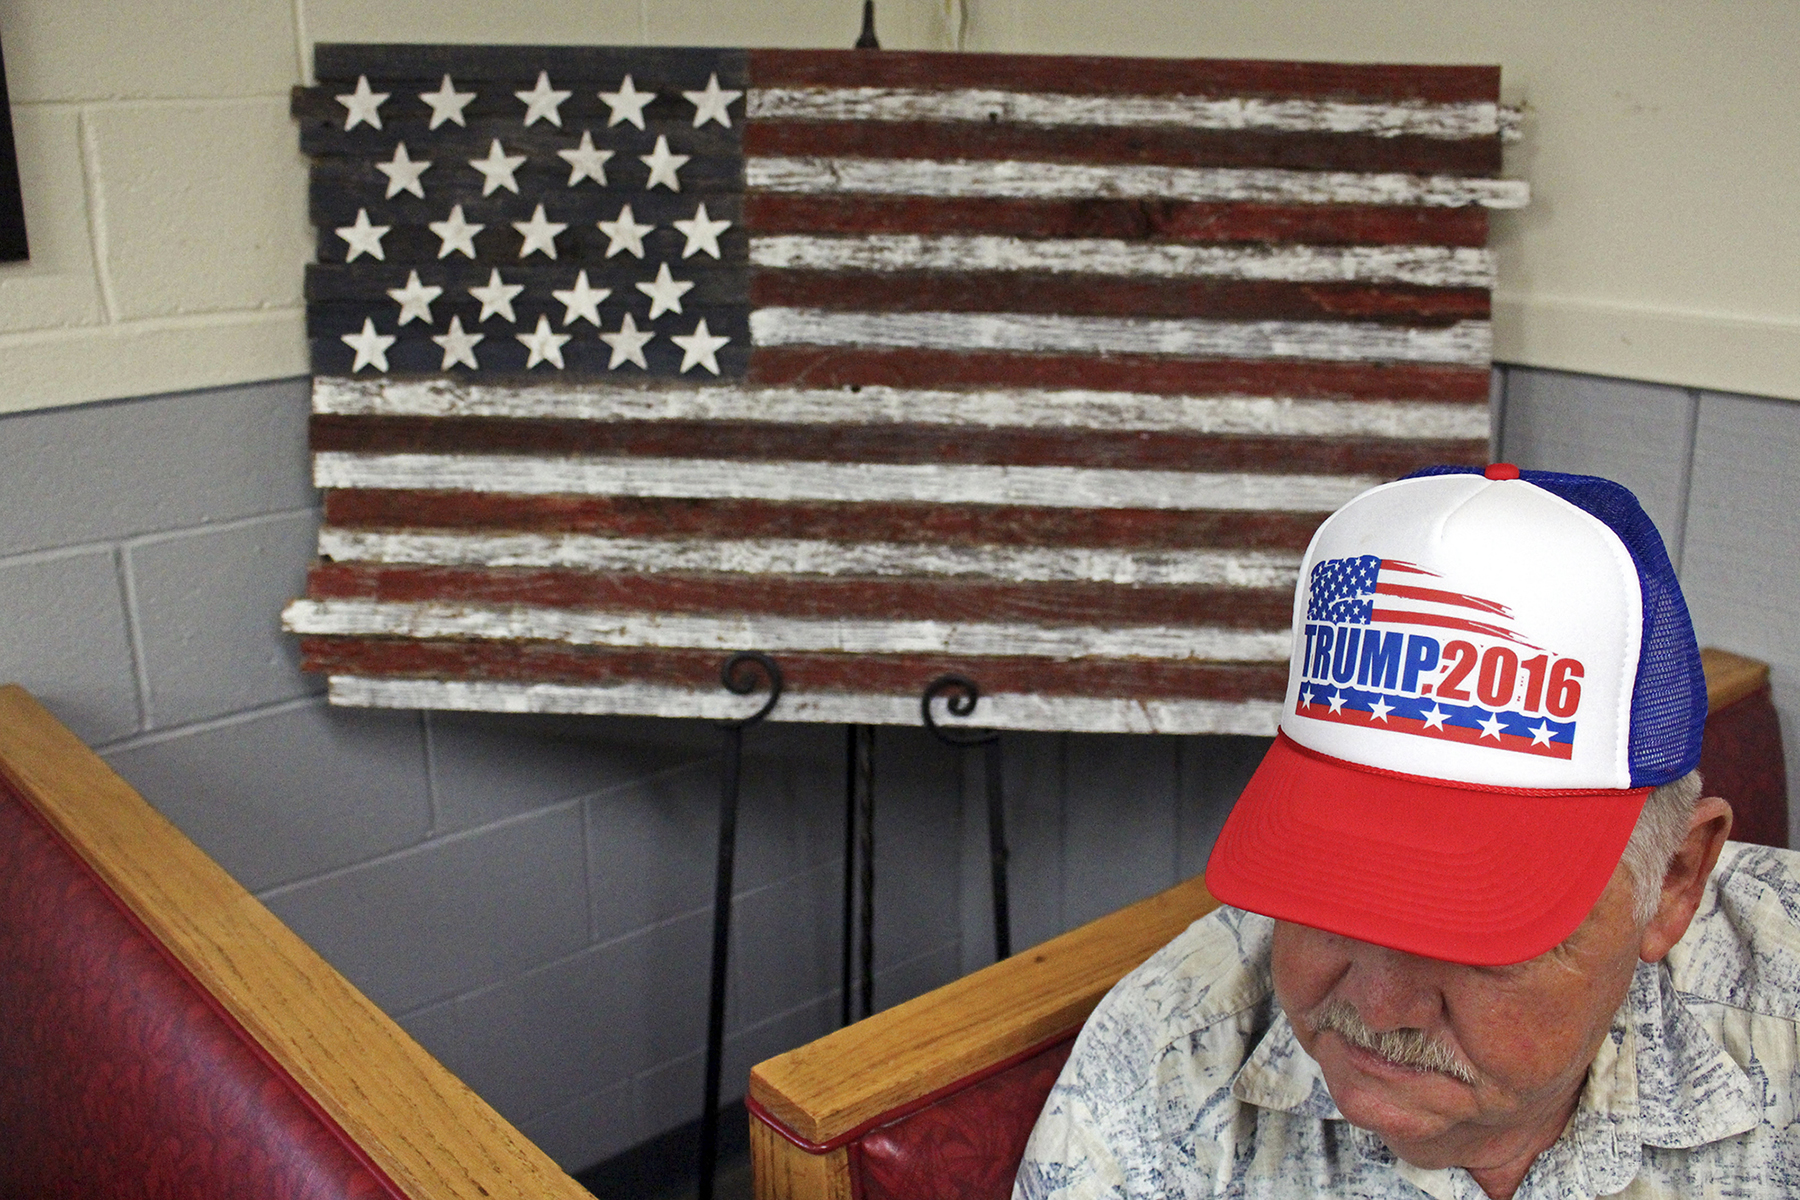 Roy Rogergray, 71, has lived in Celina, Tennessee, all his life and is voting for Donald Trump in November. He said he doesn’t care for Trump’s personality, but he agrees with most of his policies. (Emily Mills/News21)